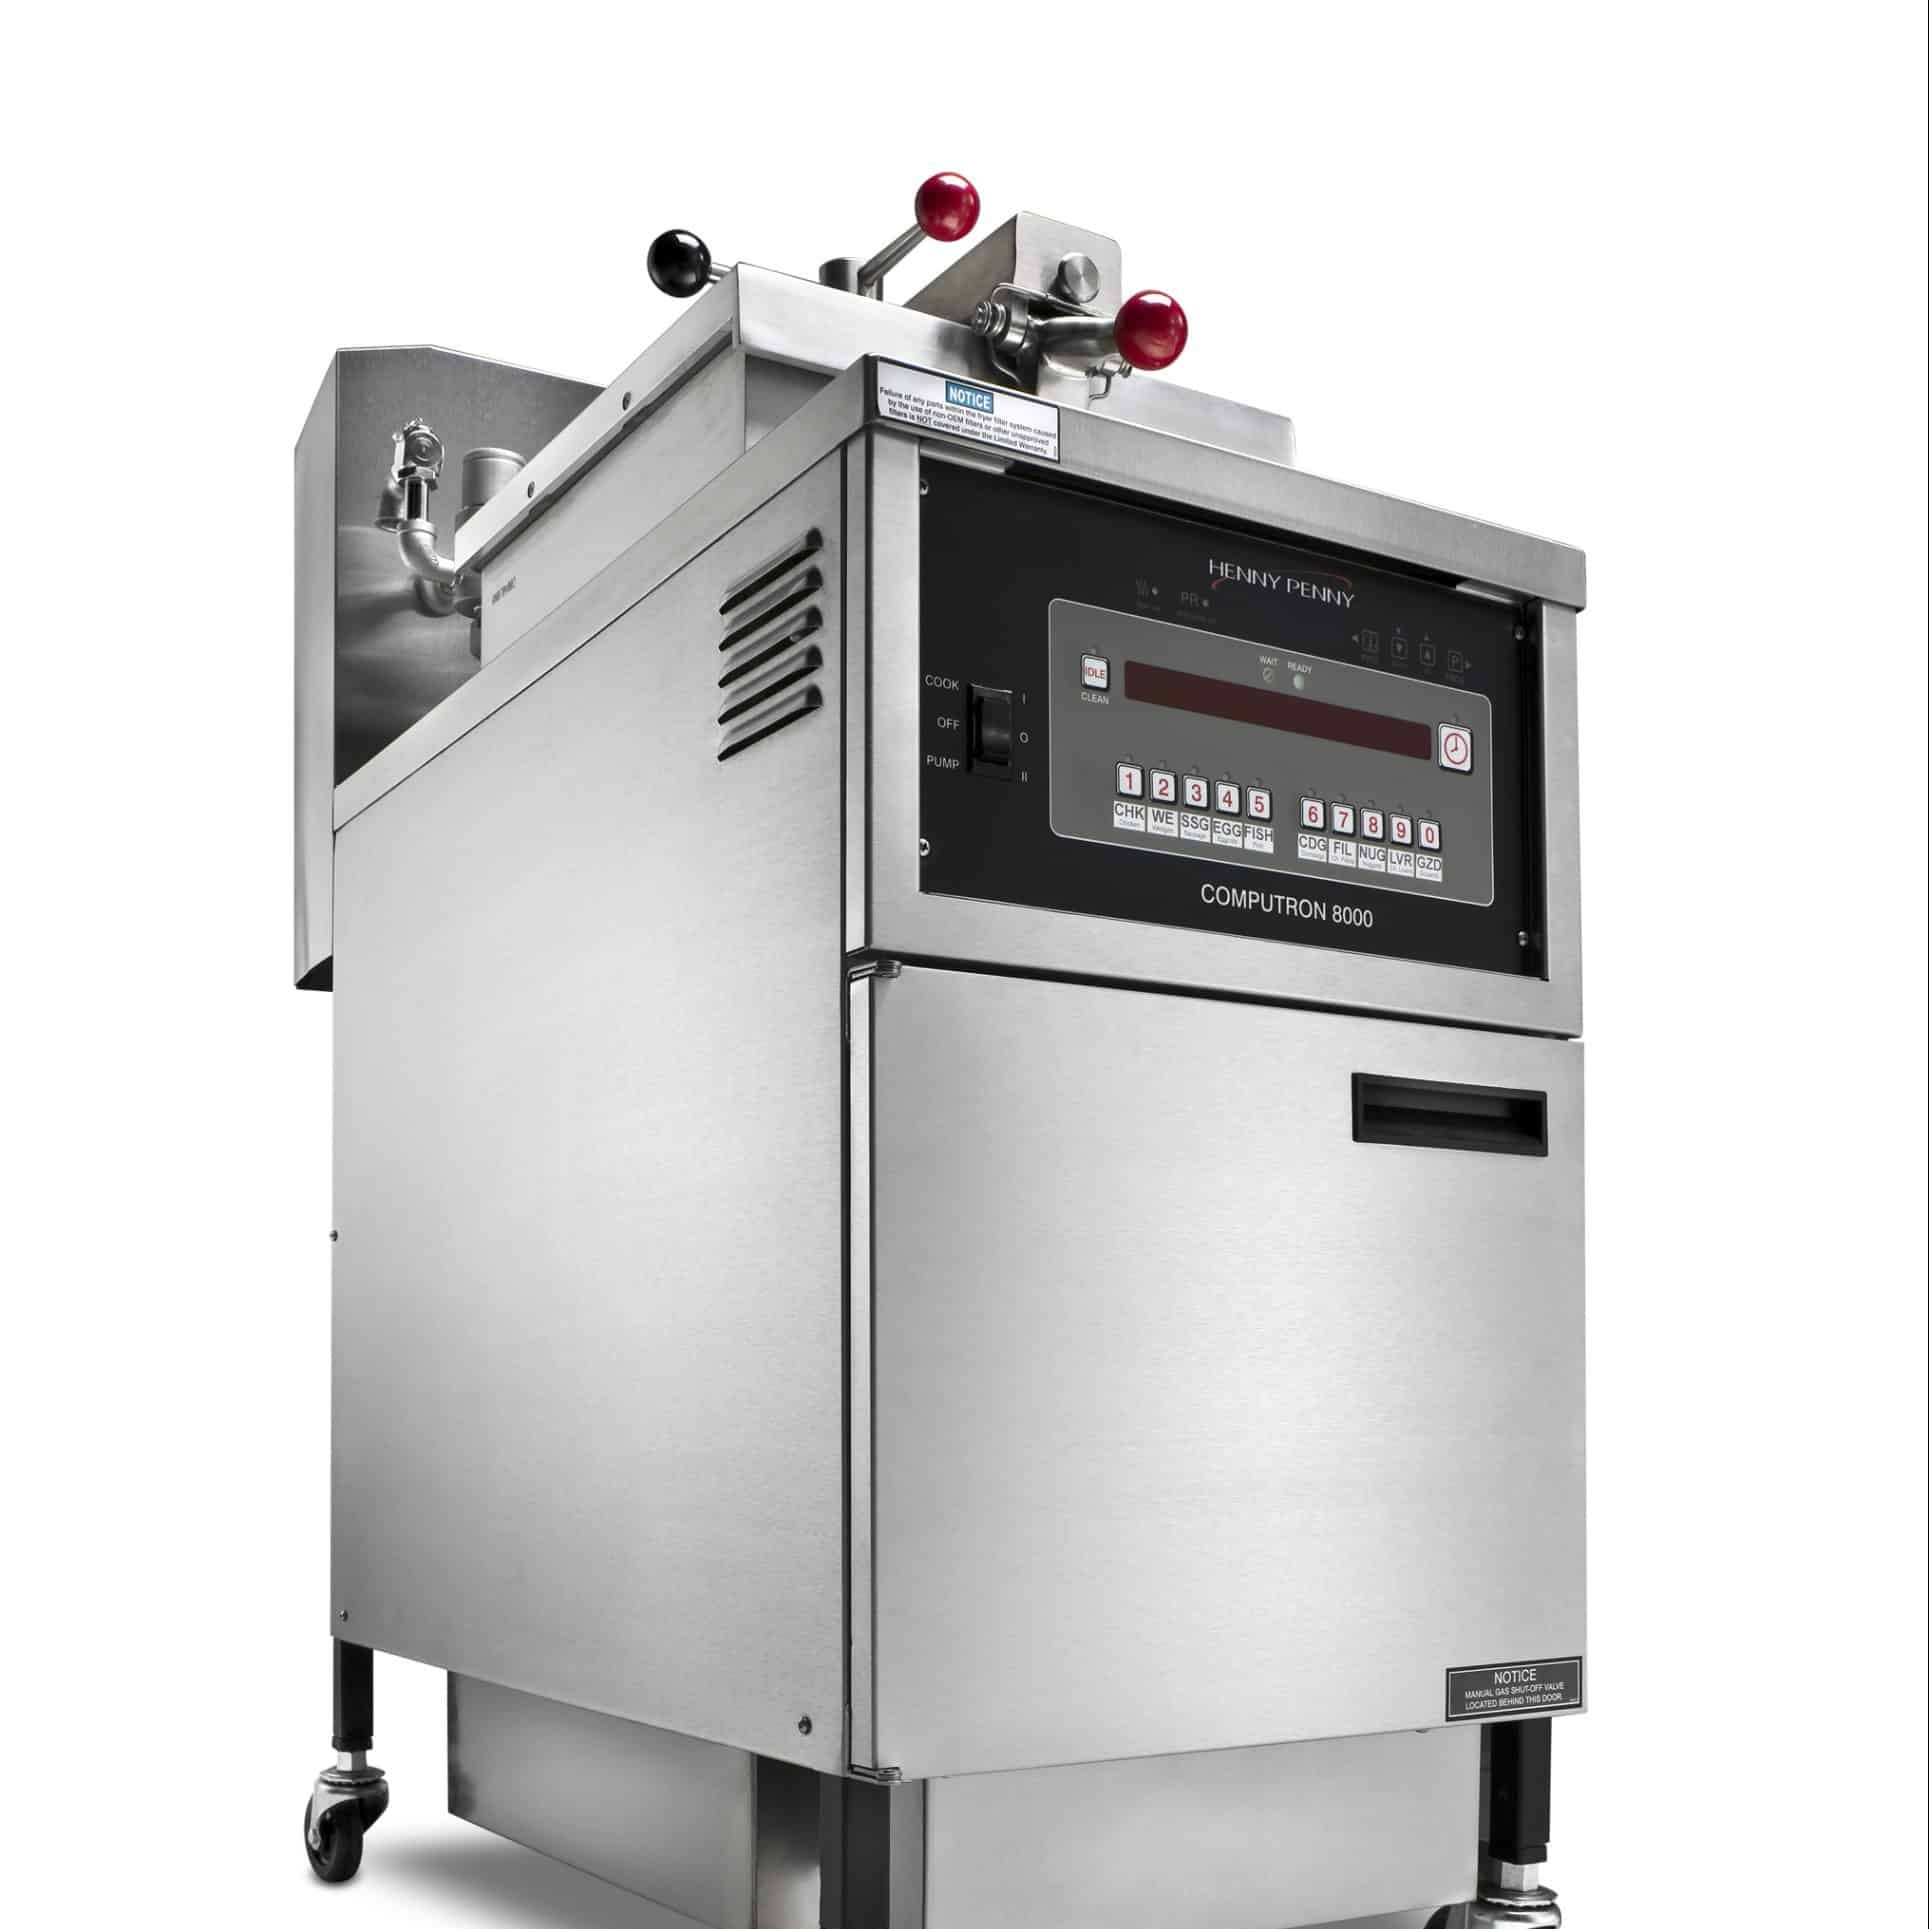 Get to know... the 4 head pressure fryer